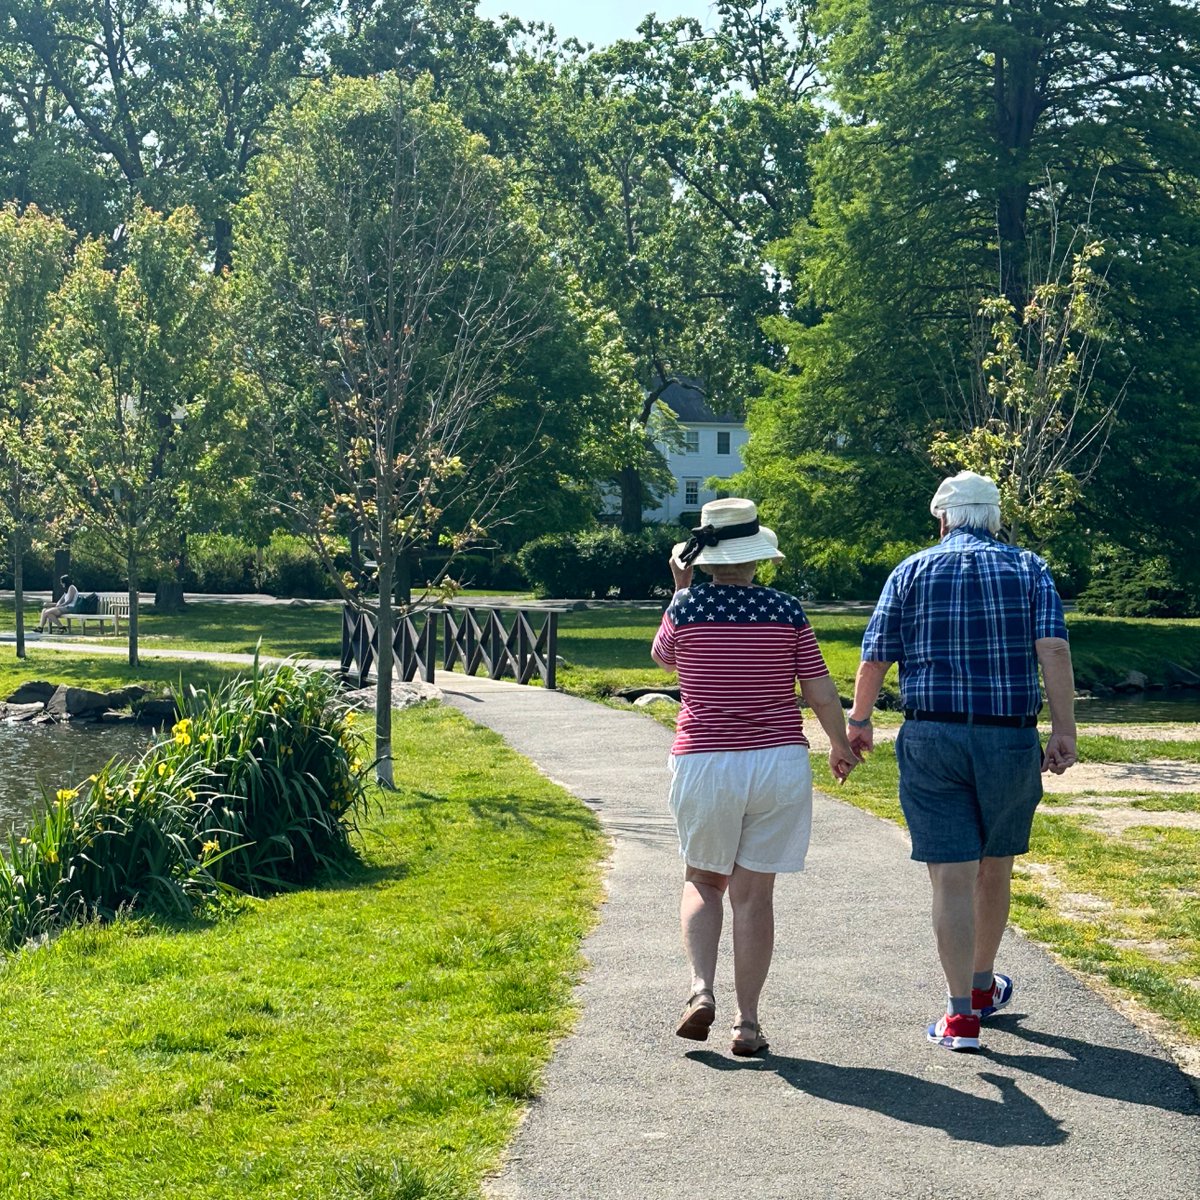 Walking together hand in hand is how we age with attitude. That and wearing red white and blue. Positive attitude about aging could boost health bit.ly/3D3ff3L #agingwithattitude #aginginplace #independentliving #thrivinginmotion #cherish